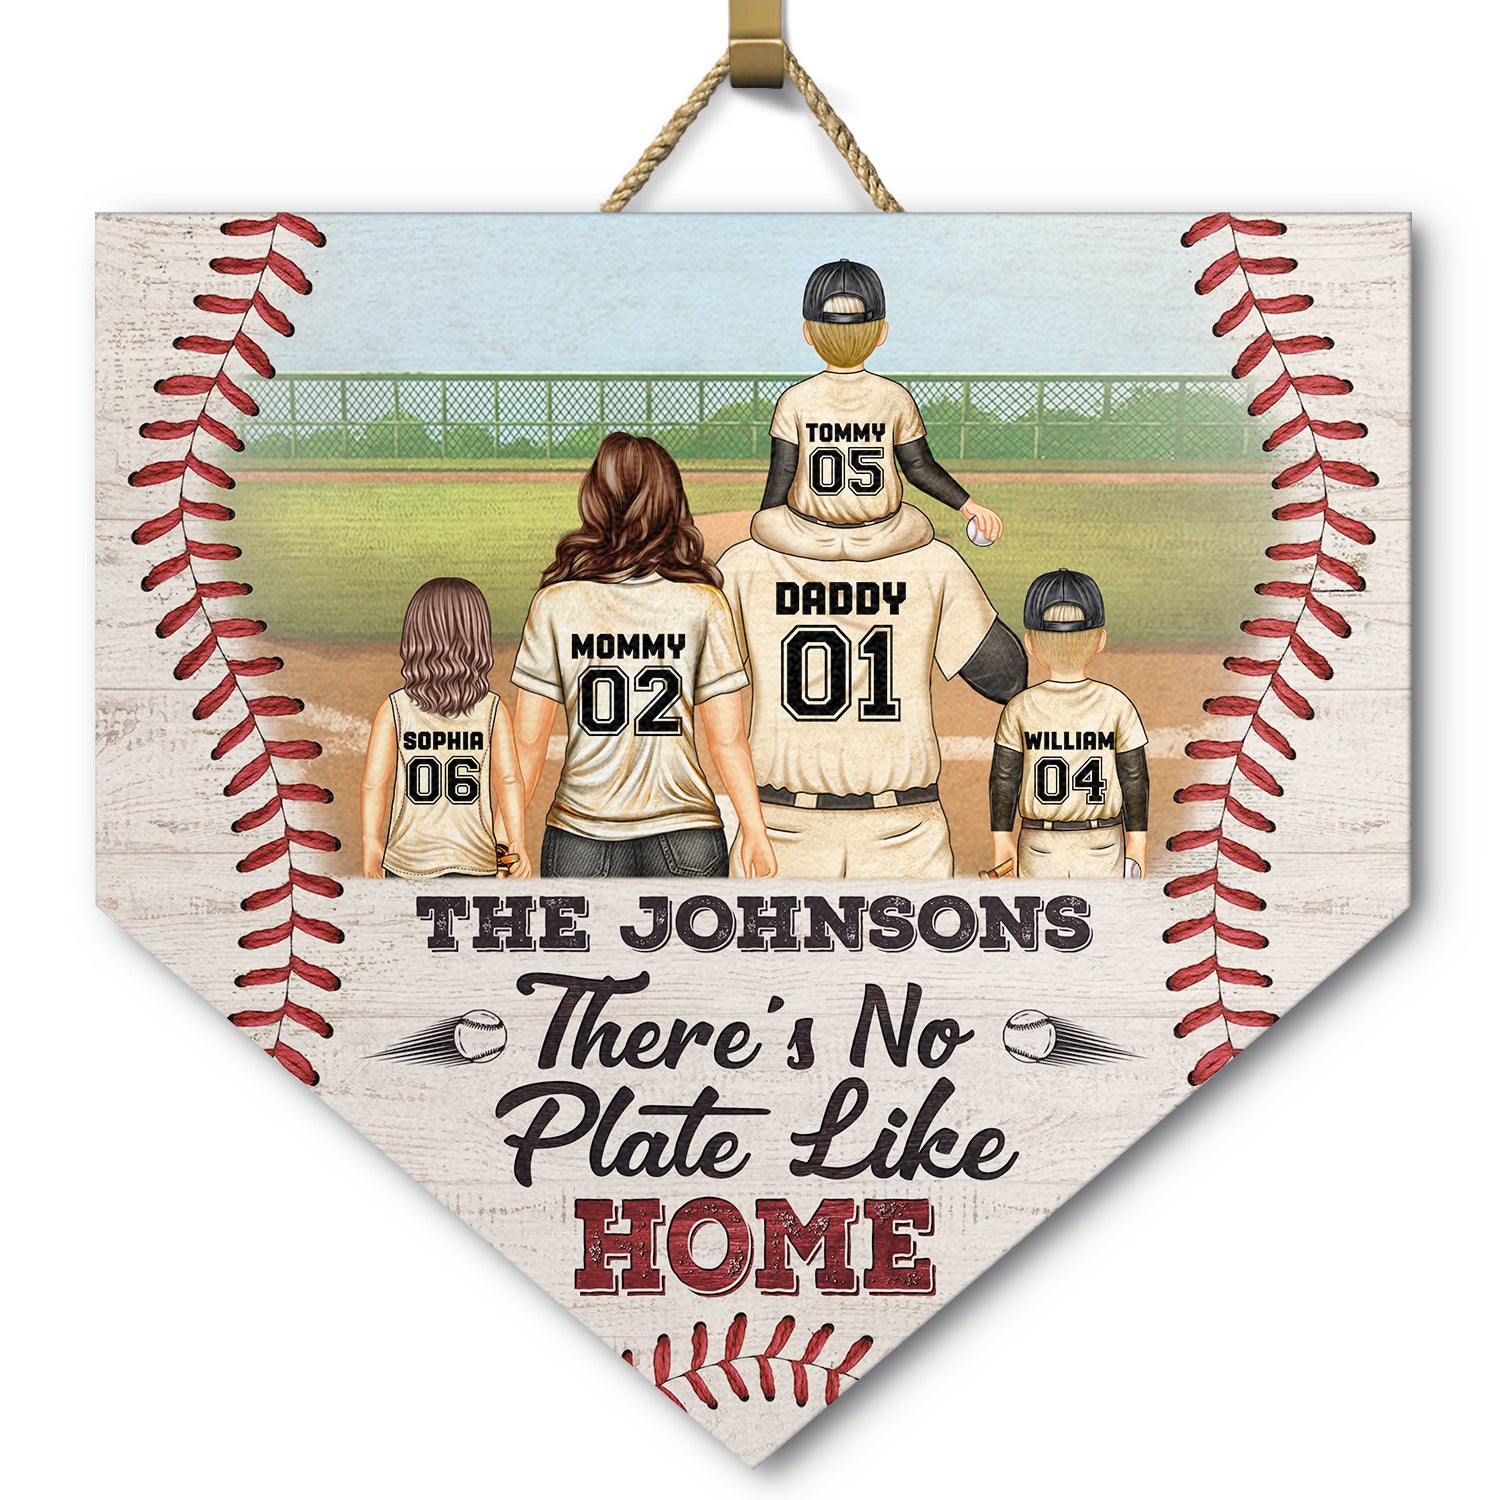 There's No Plate Like Home - Gift For Family, Baseball, Softball Fans - Personalized Custom Shaped Wood Sign